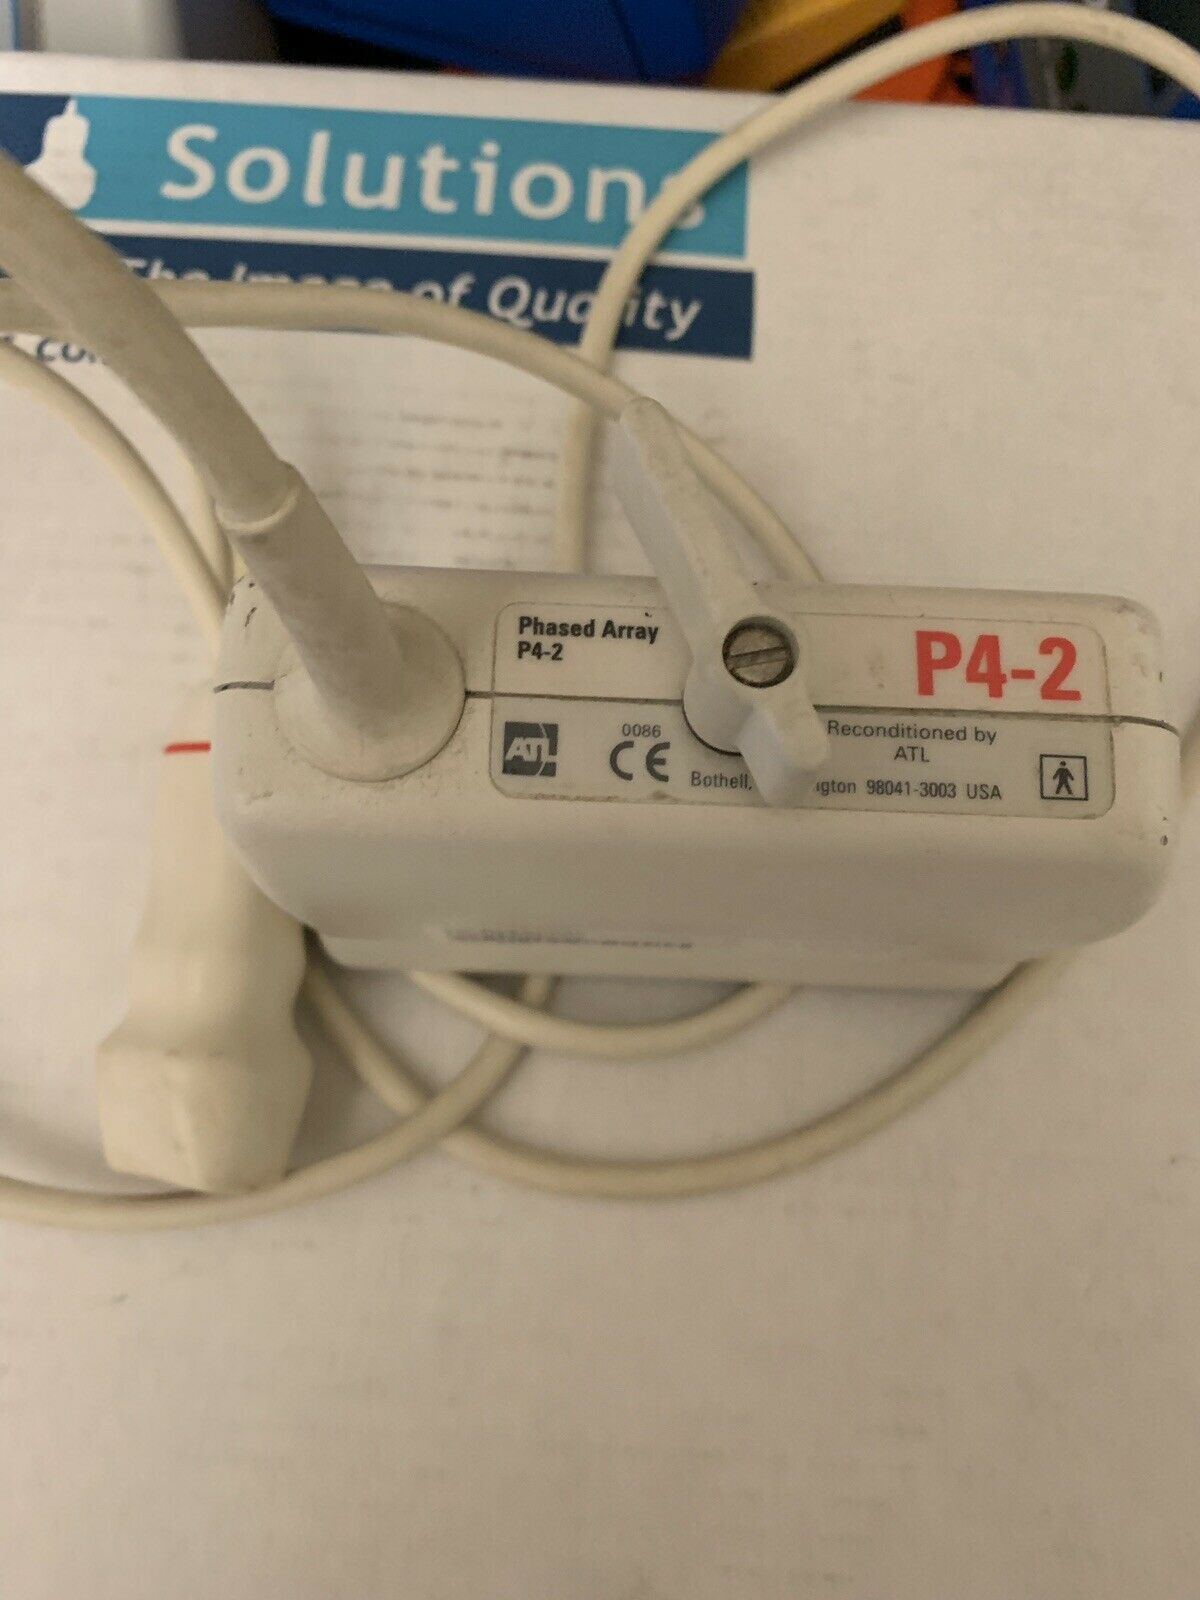 Philips ATL P4-2 Phased Array Cardiac Ultrasound Transducer Probe Sector Module DIAGNOSTIC ULTRASOUND MACHINES FOR SALE